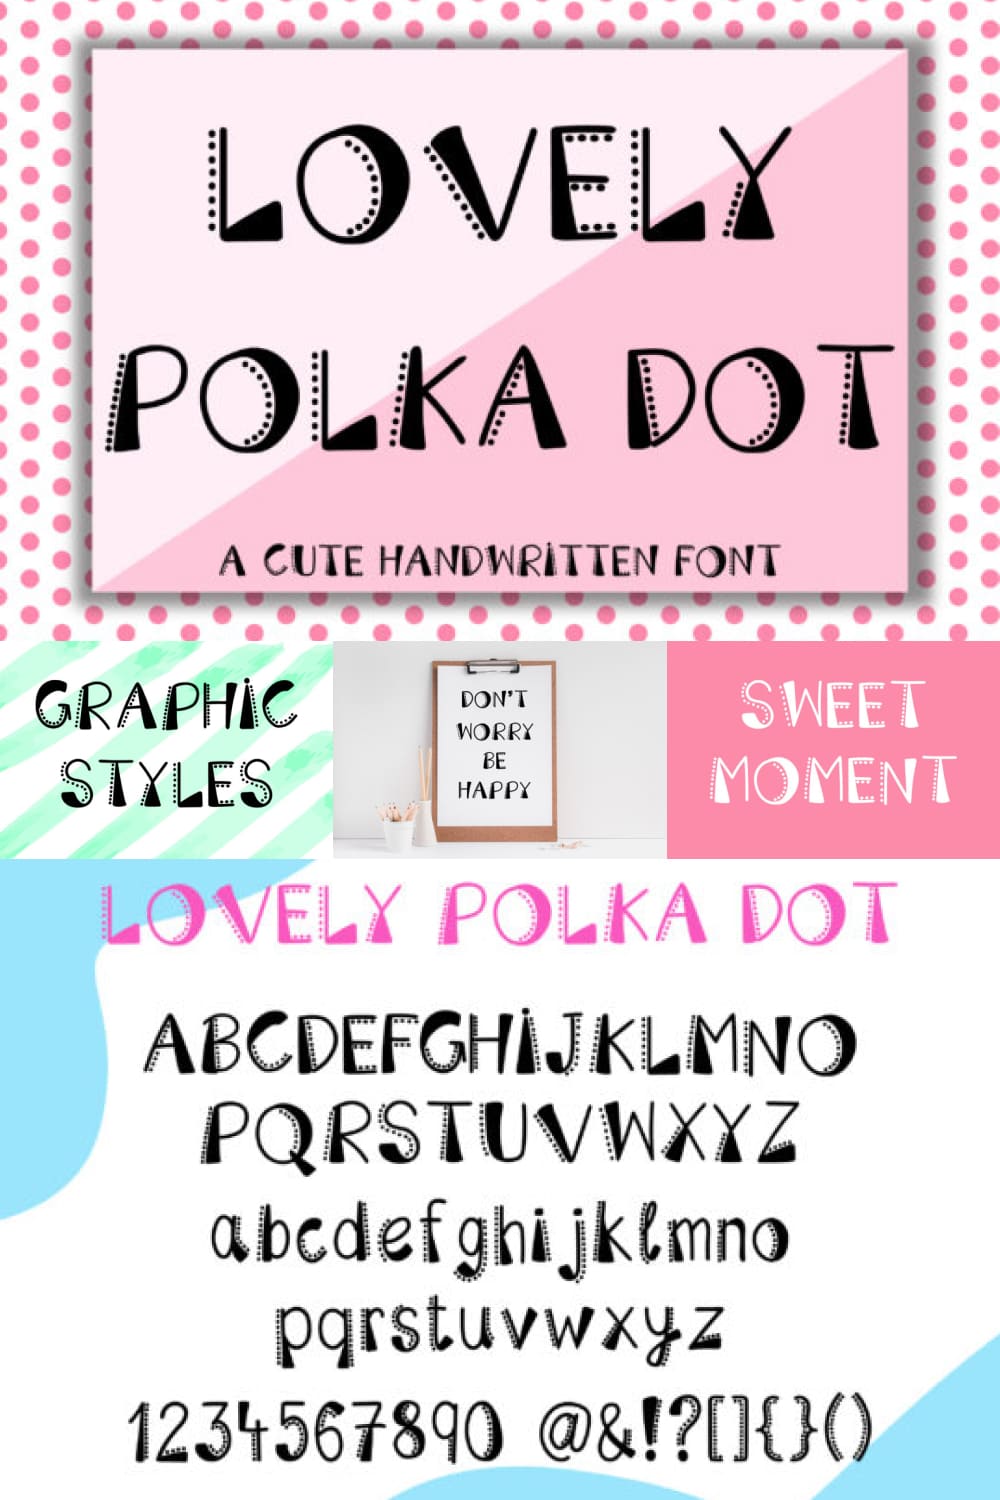 This is a cute and fun handwritten font with a cheerful feel.